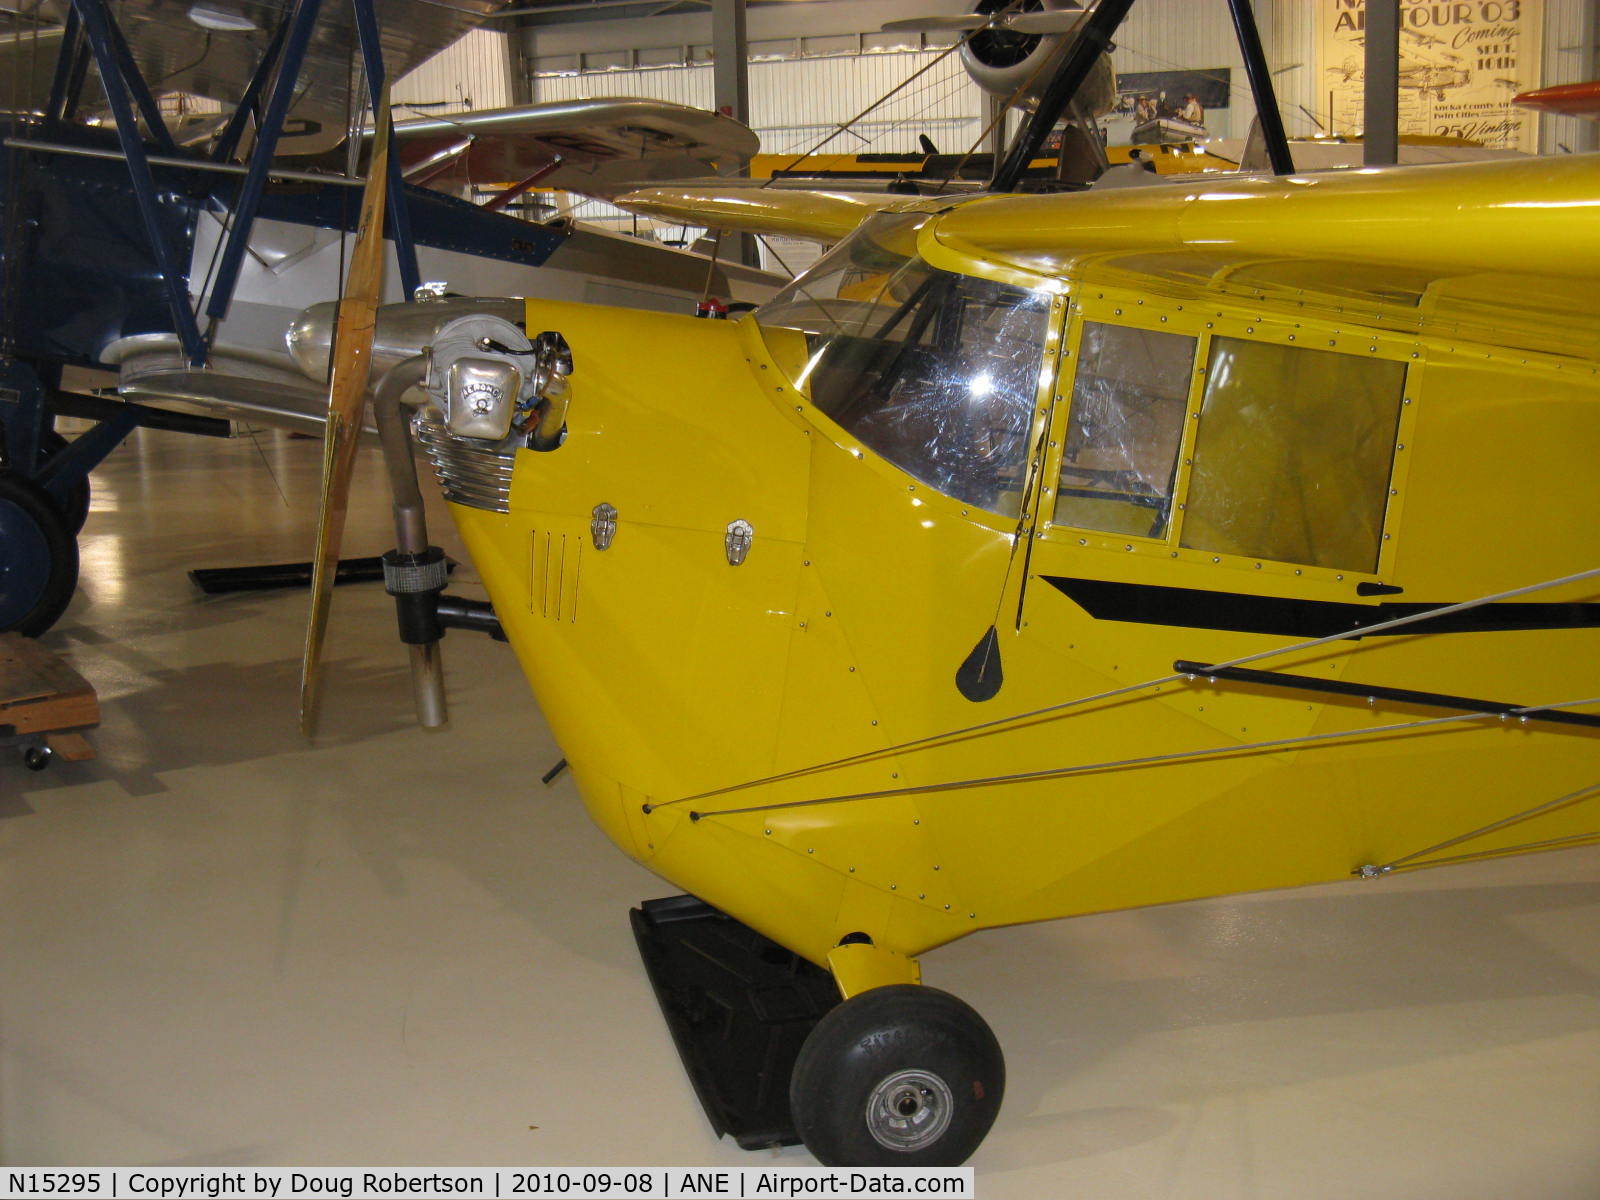 N15295, 1936 Aeronca C-3 C/N 623, 1936 Aeronca C-3, Aeronca two cylinder E-113 37 Hp. At Golden Wings Museum. See/read my article on the Aeronca C-2 and C-3 aircraft in this site.